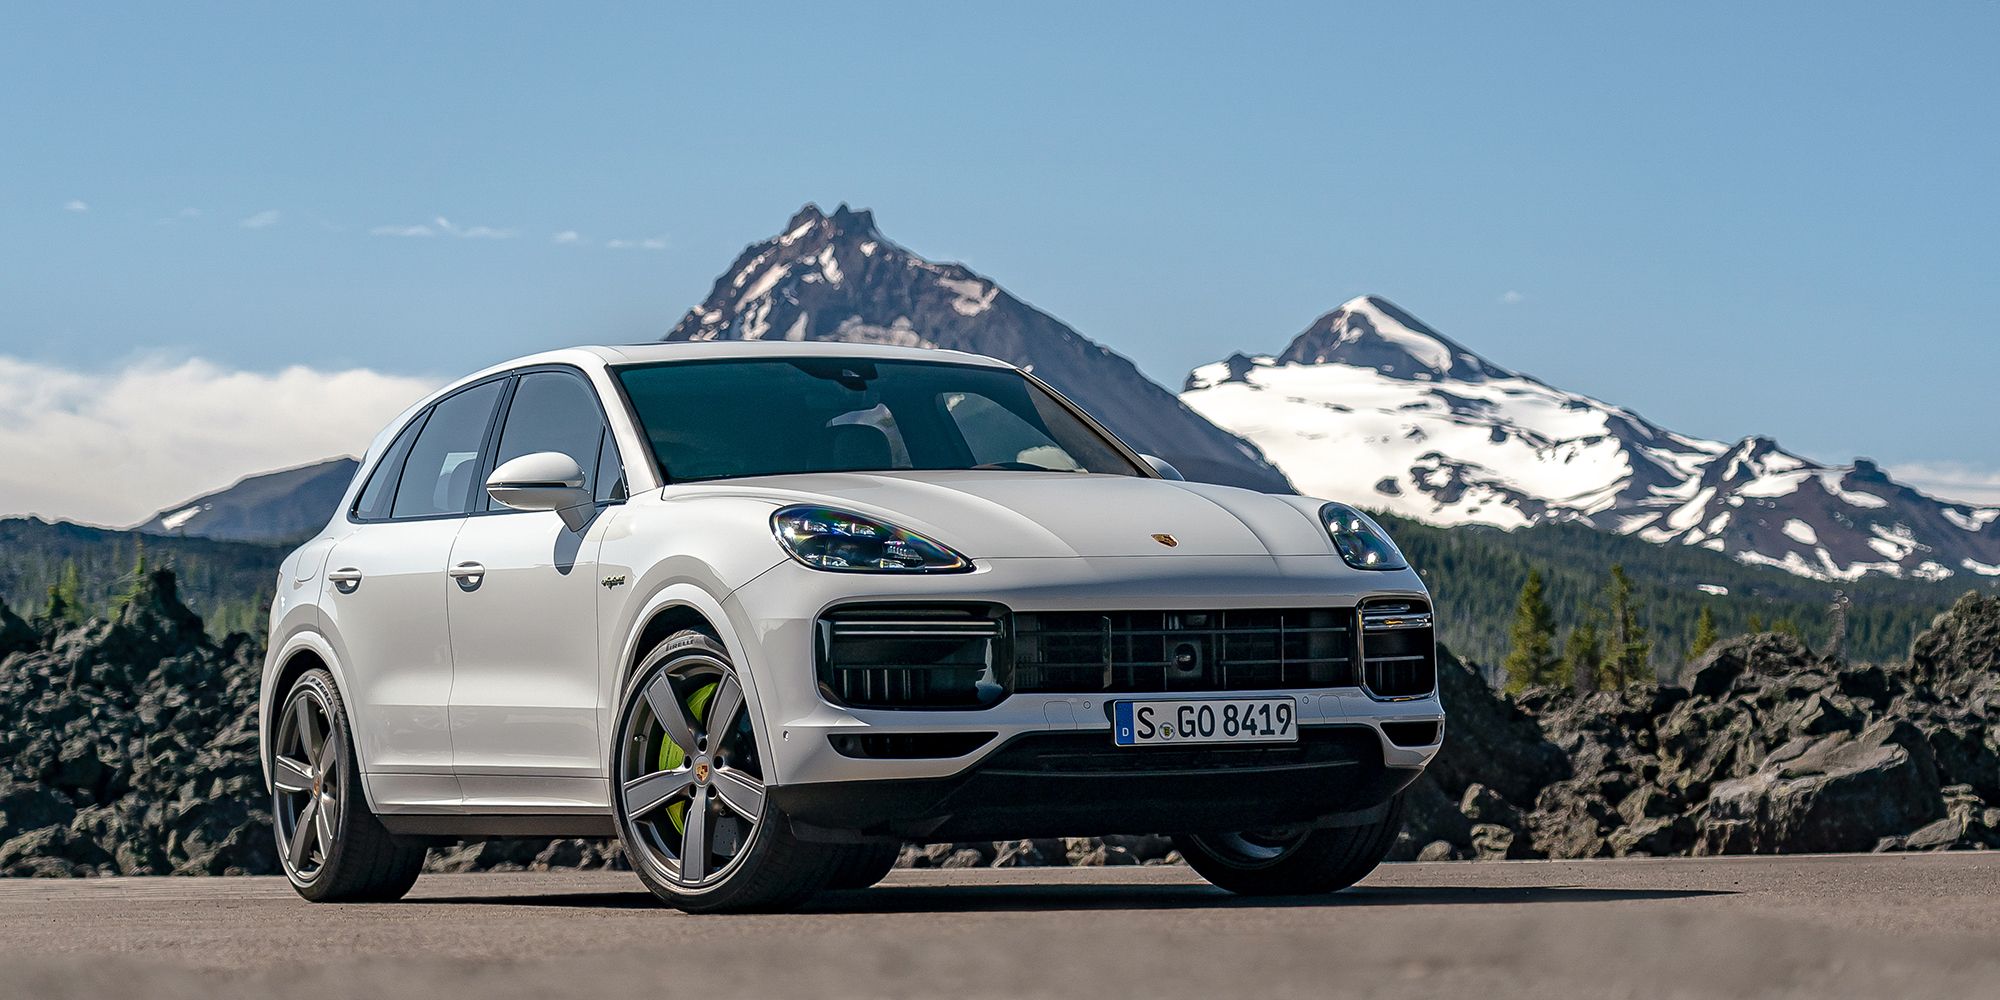 The front of the Porsche Cayenne Turbo S E-Hybrid